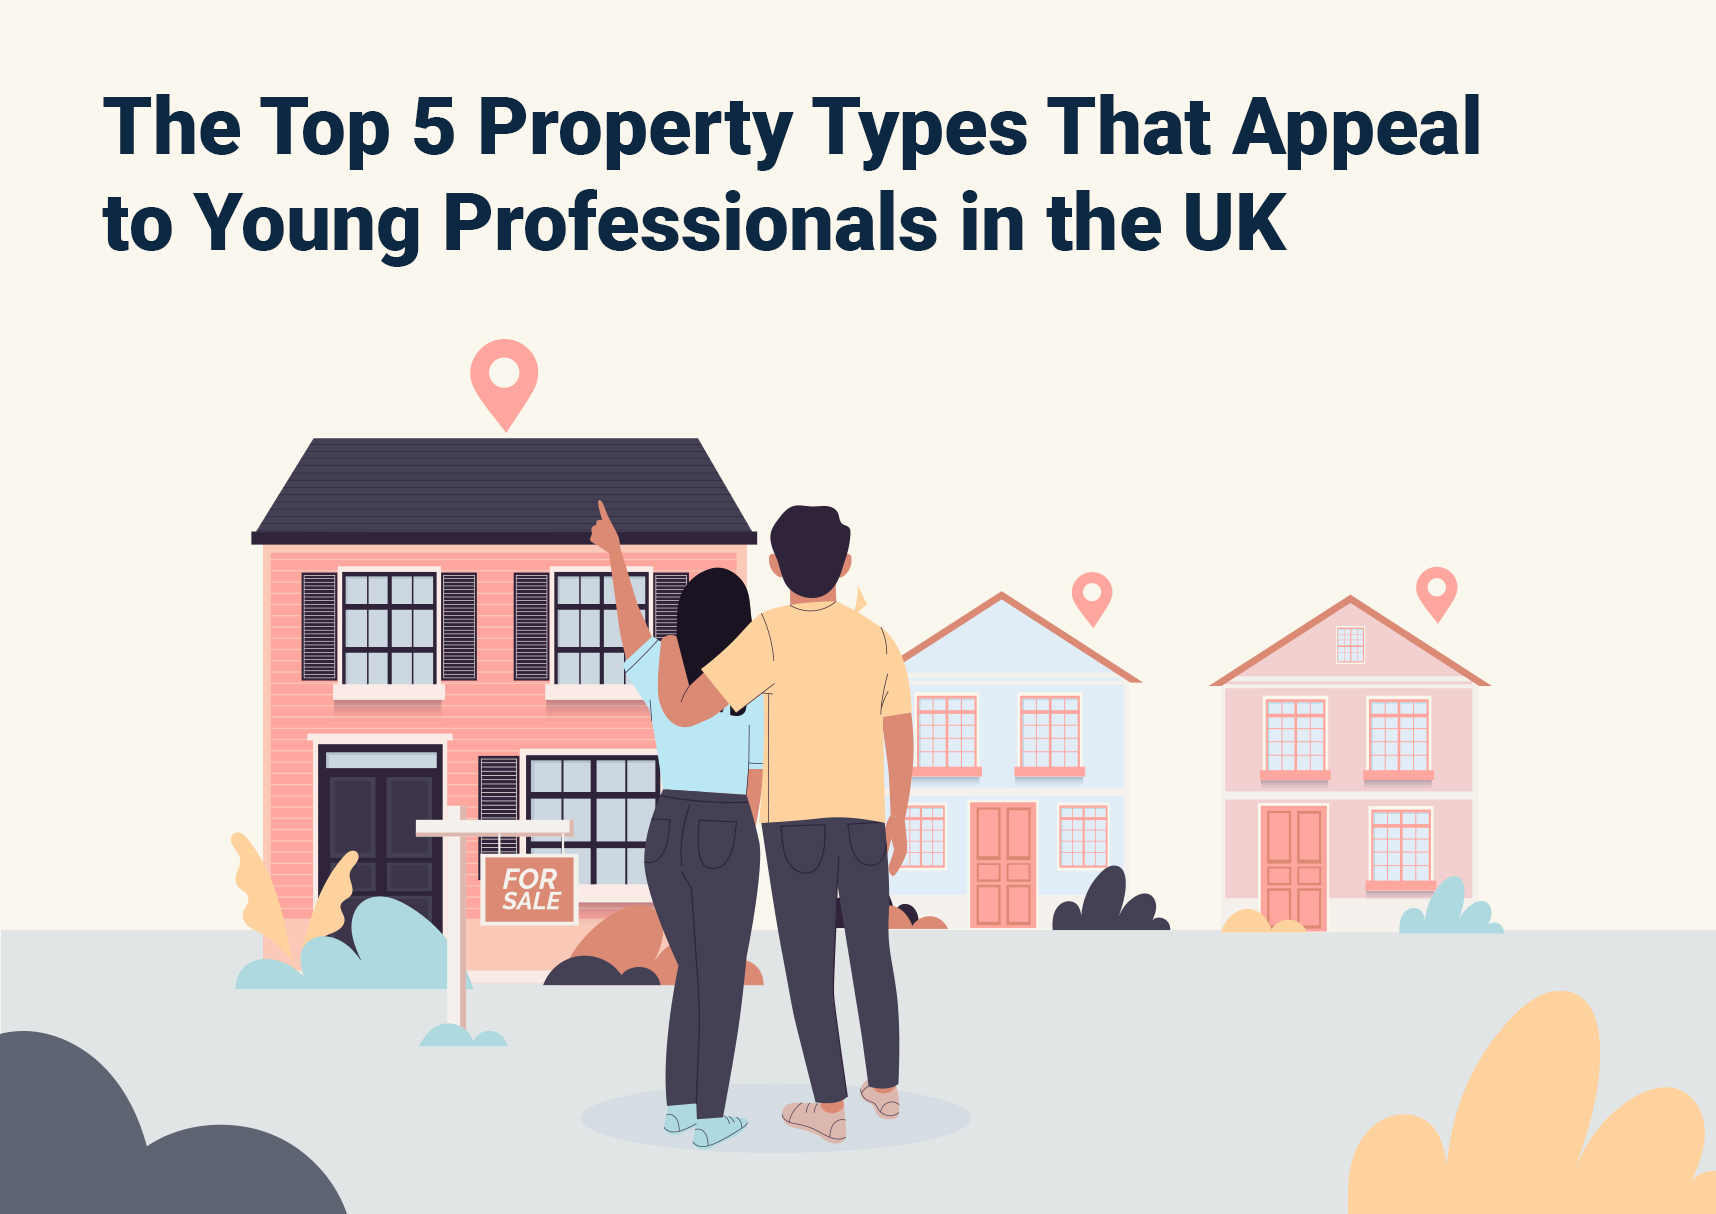 The Top 5 Property Types That Appeal to Young Professionals in the UK